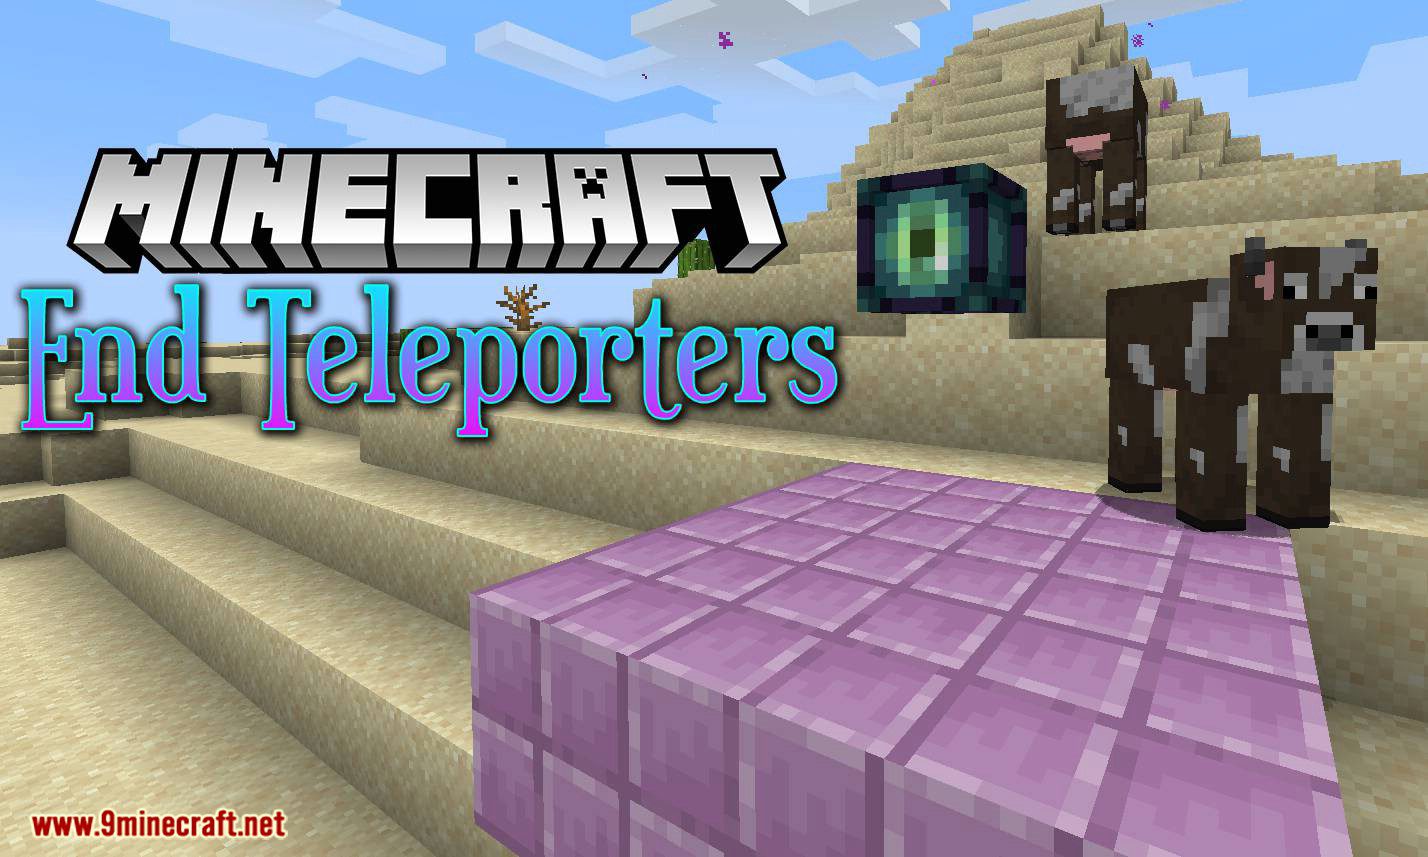 End Teleporters mod for minecraft logo